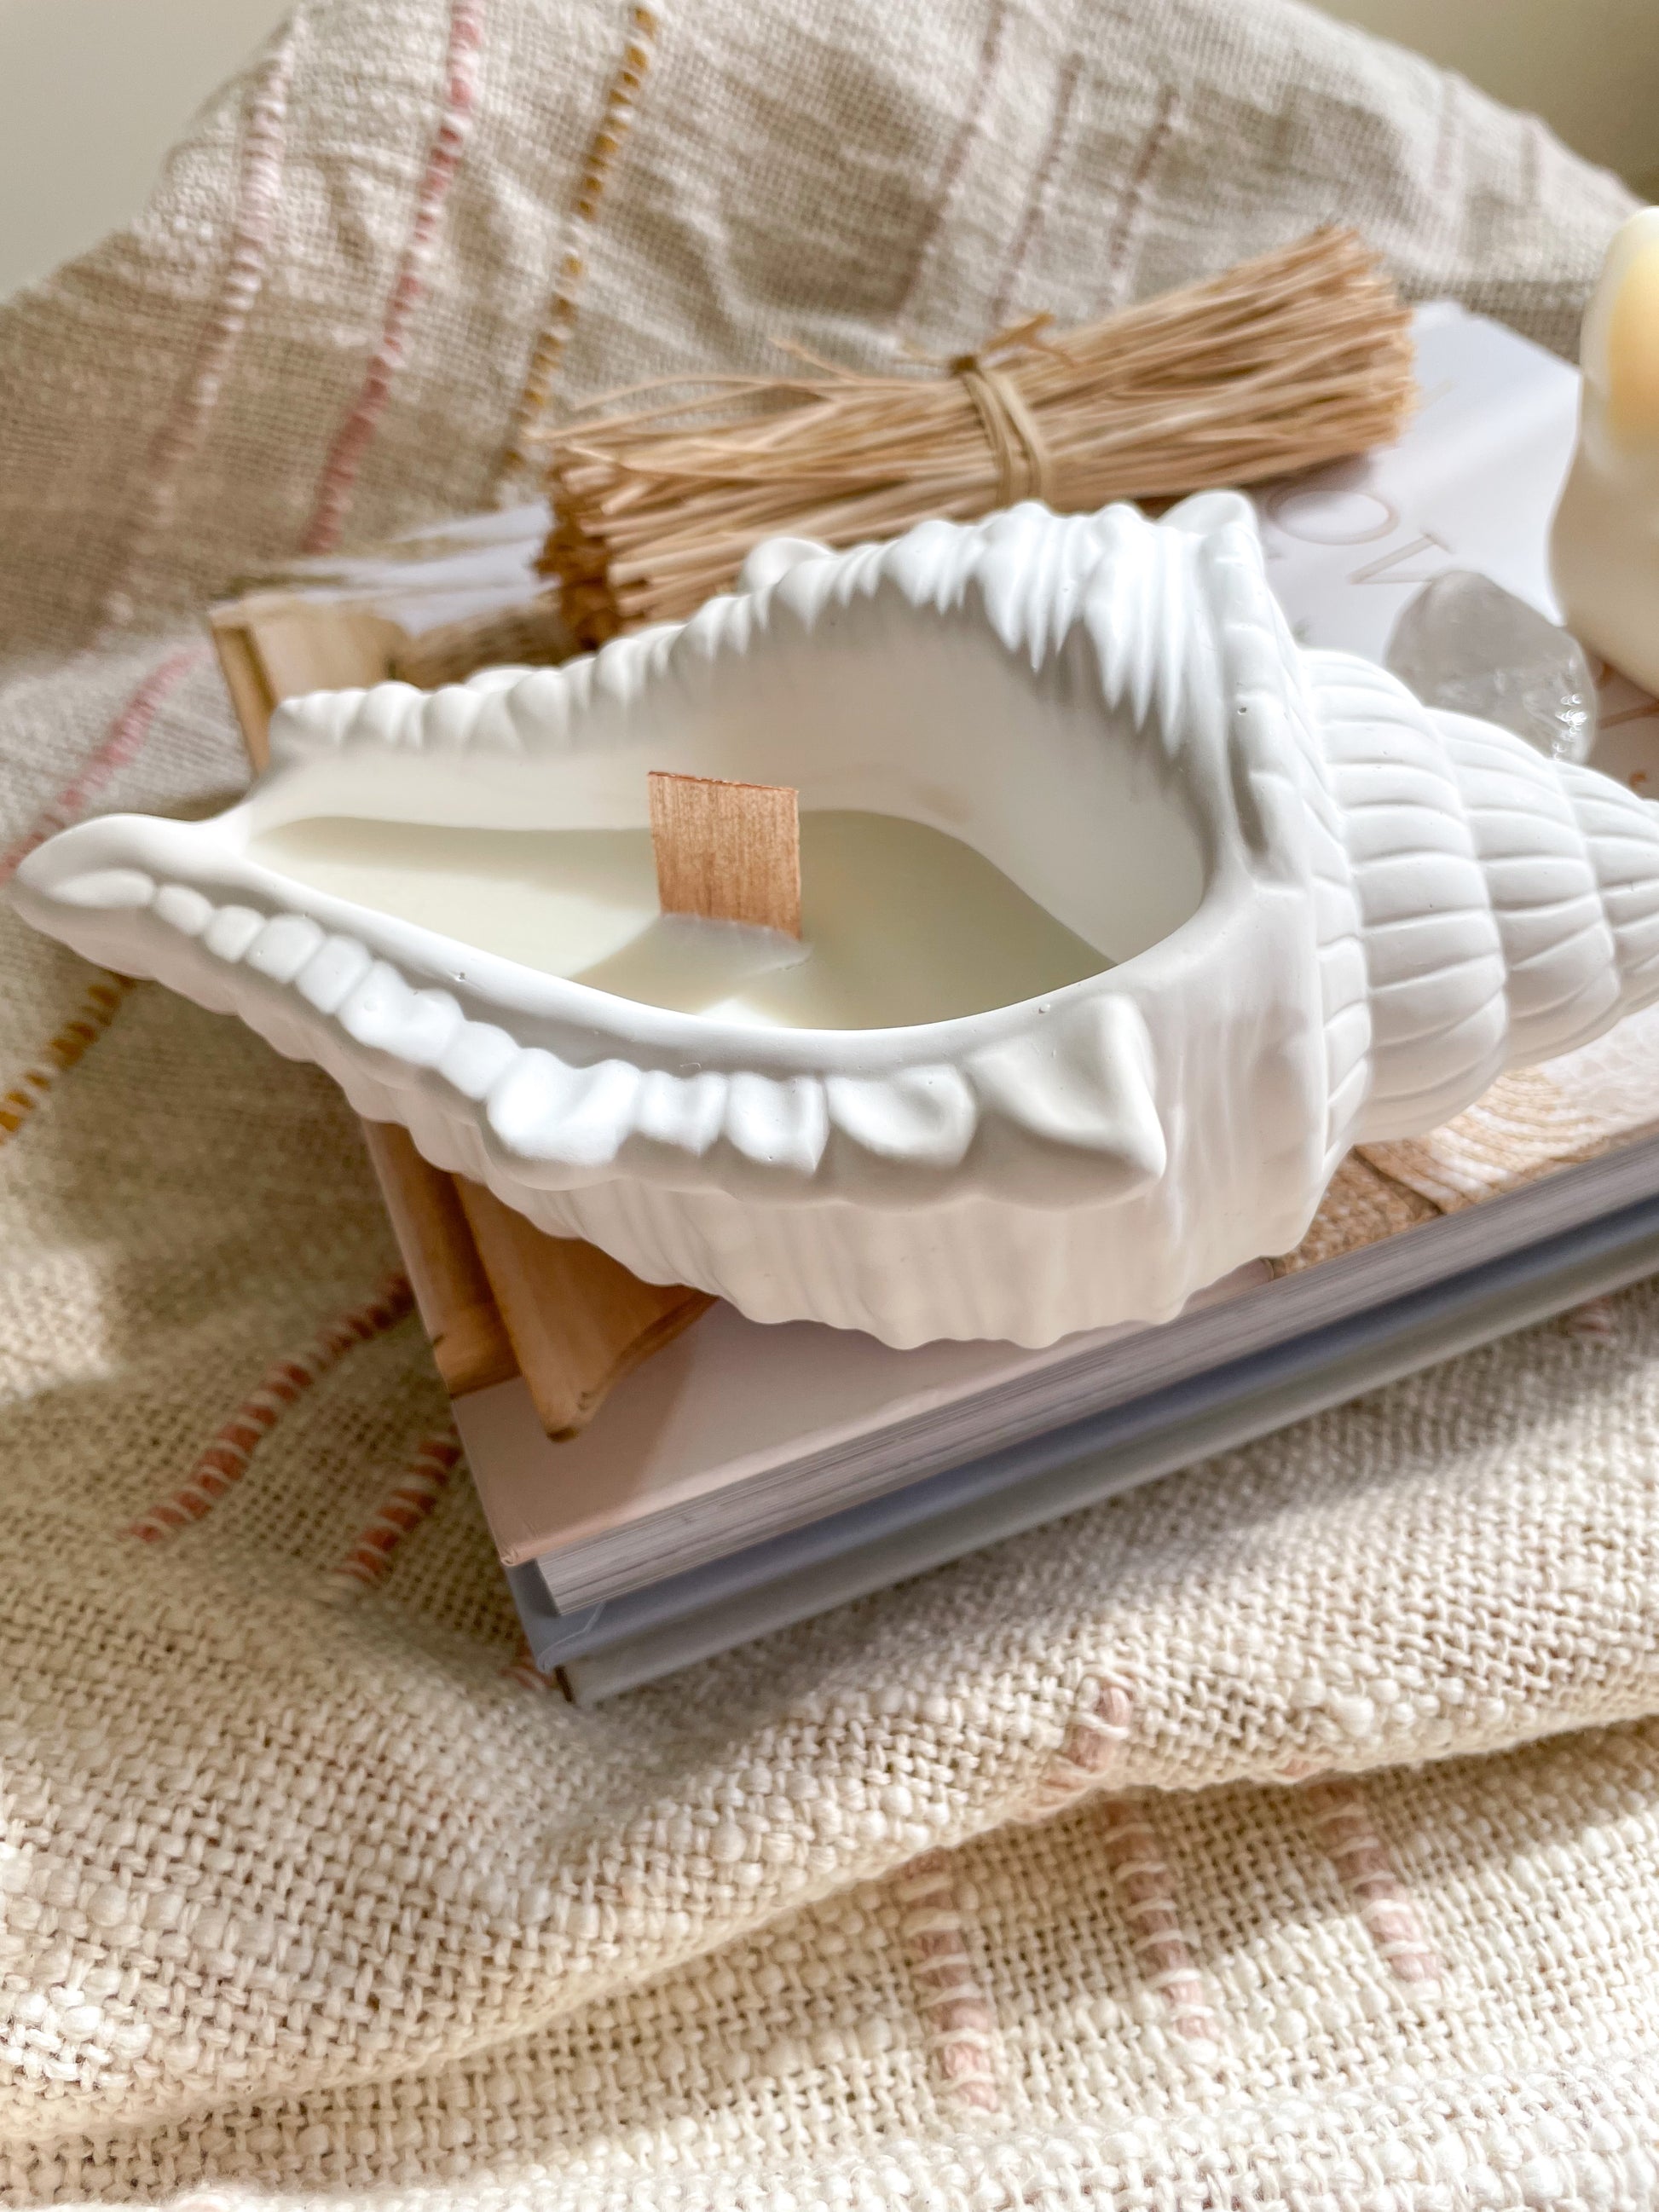 Closeup view of Seashell soywax candle placed on a coffee table book